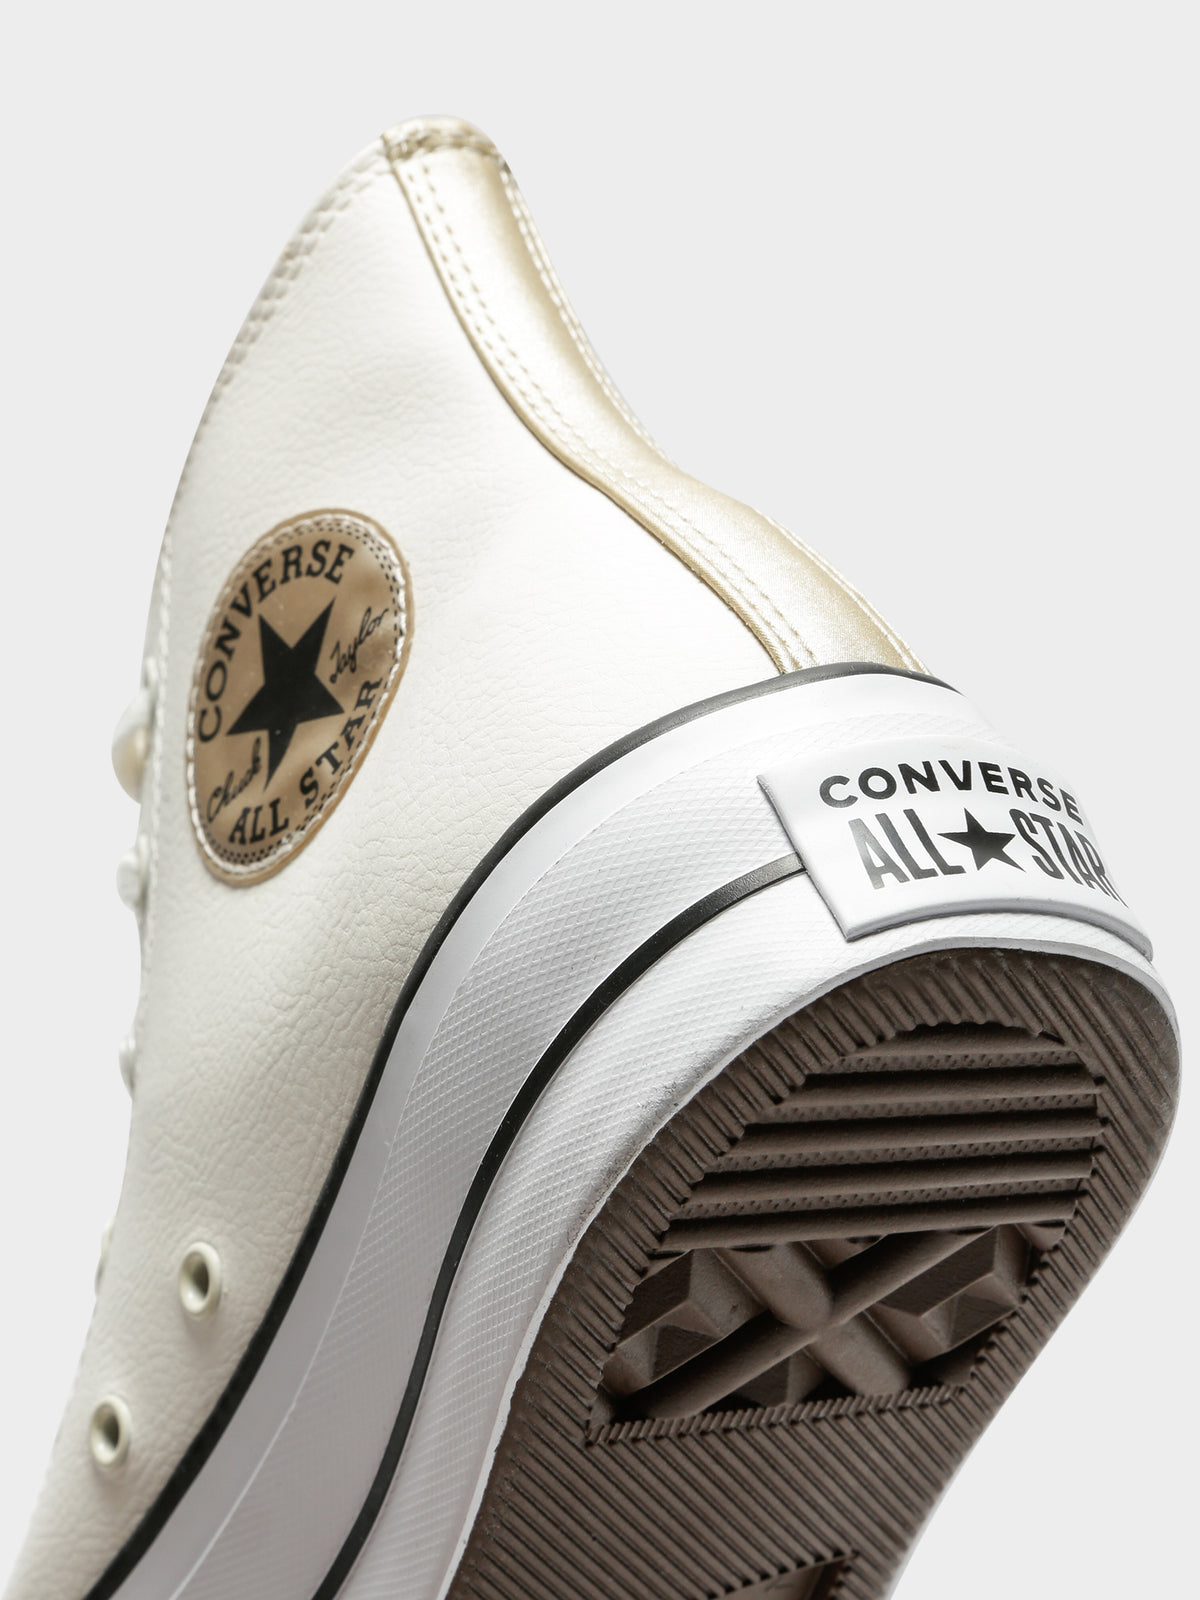 Womens Chuck Taylor All Star Leather High Top in White